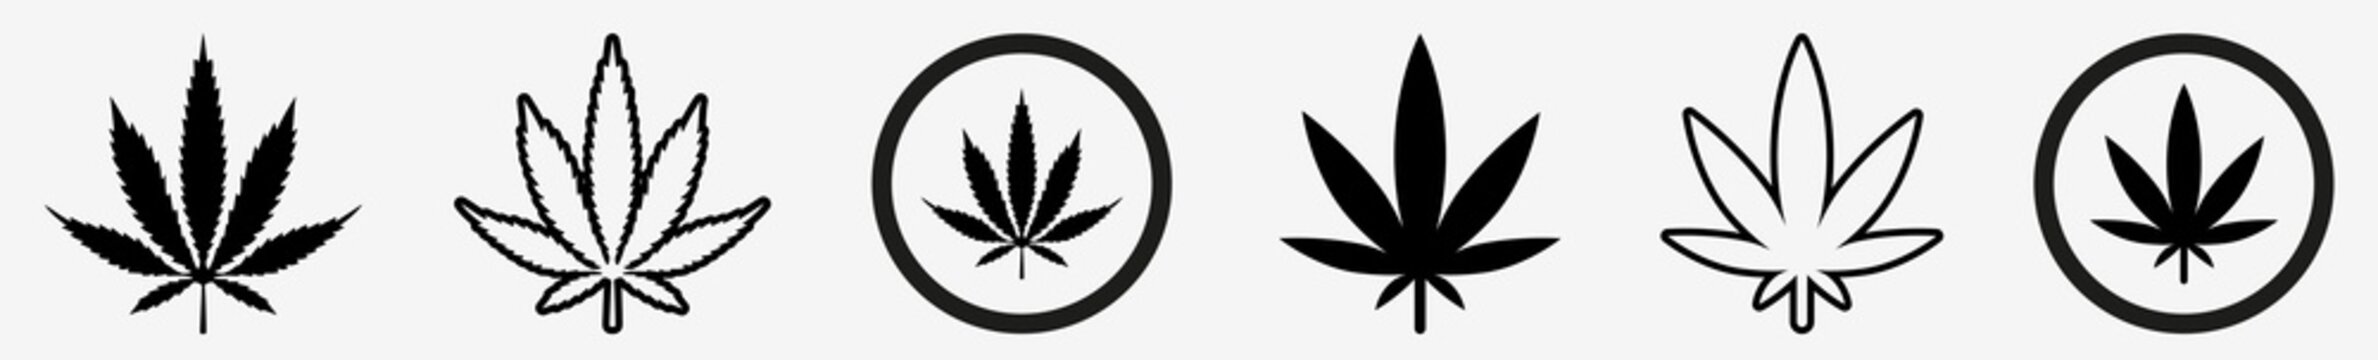 Cannabis Leaf Icon Set | Cannabis Leaves Vector Illustration Logo | Cannabis Leaf Icons Isolated Collection